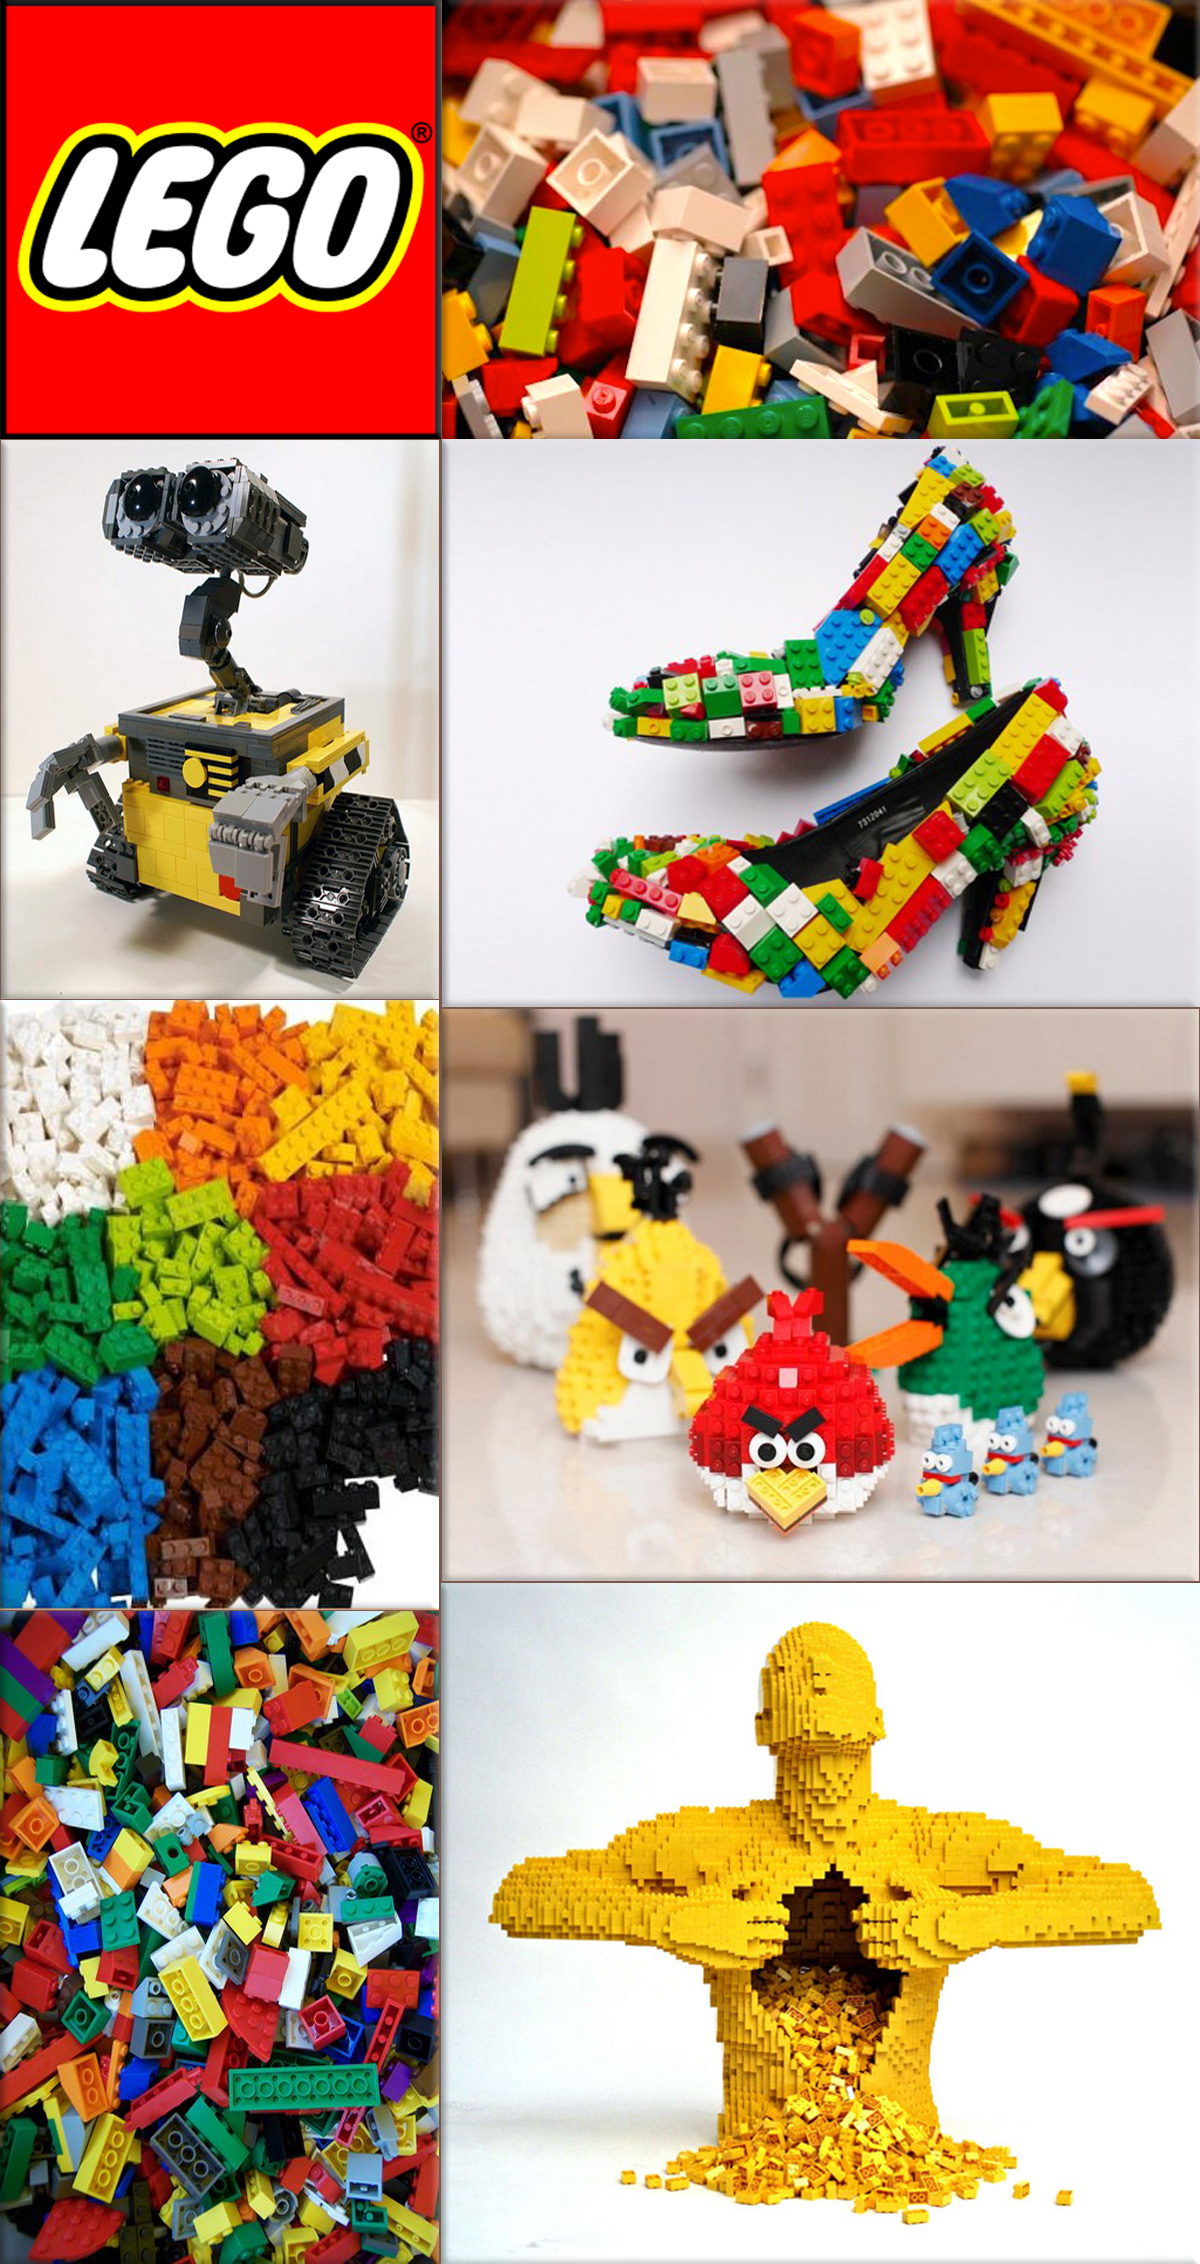 Lego (trademarked in capitals as LEGO) is a popular line of construction toys, consisting of colorful interlocking plastic bricks and an accompanying array of gears, minifigures and various other parts